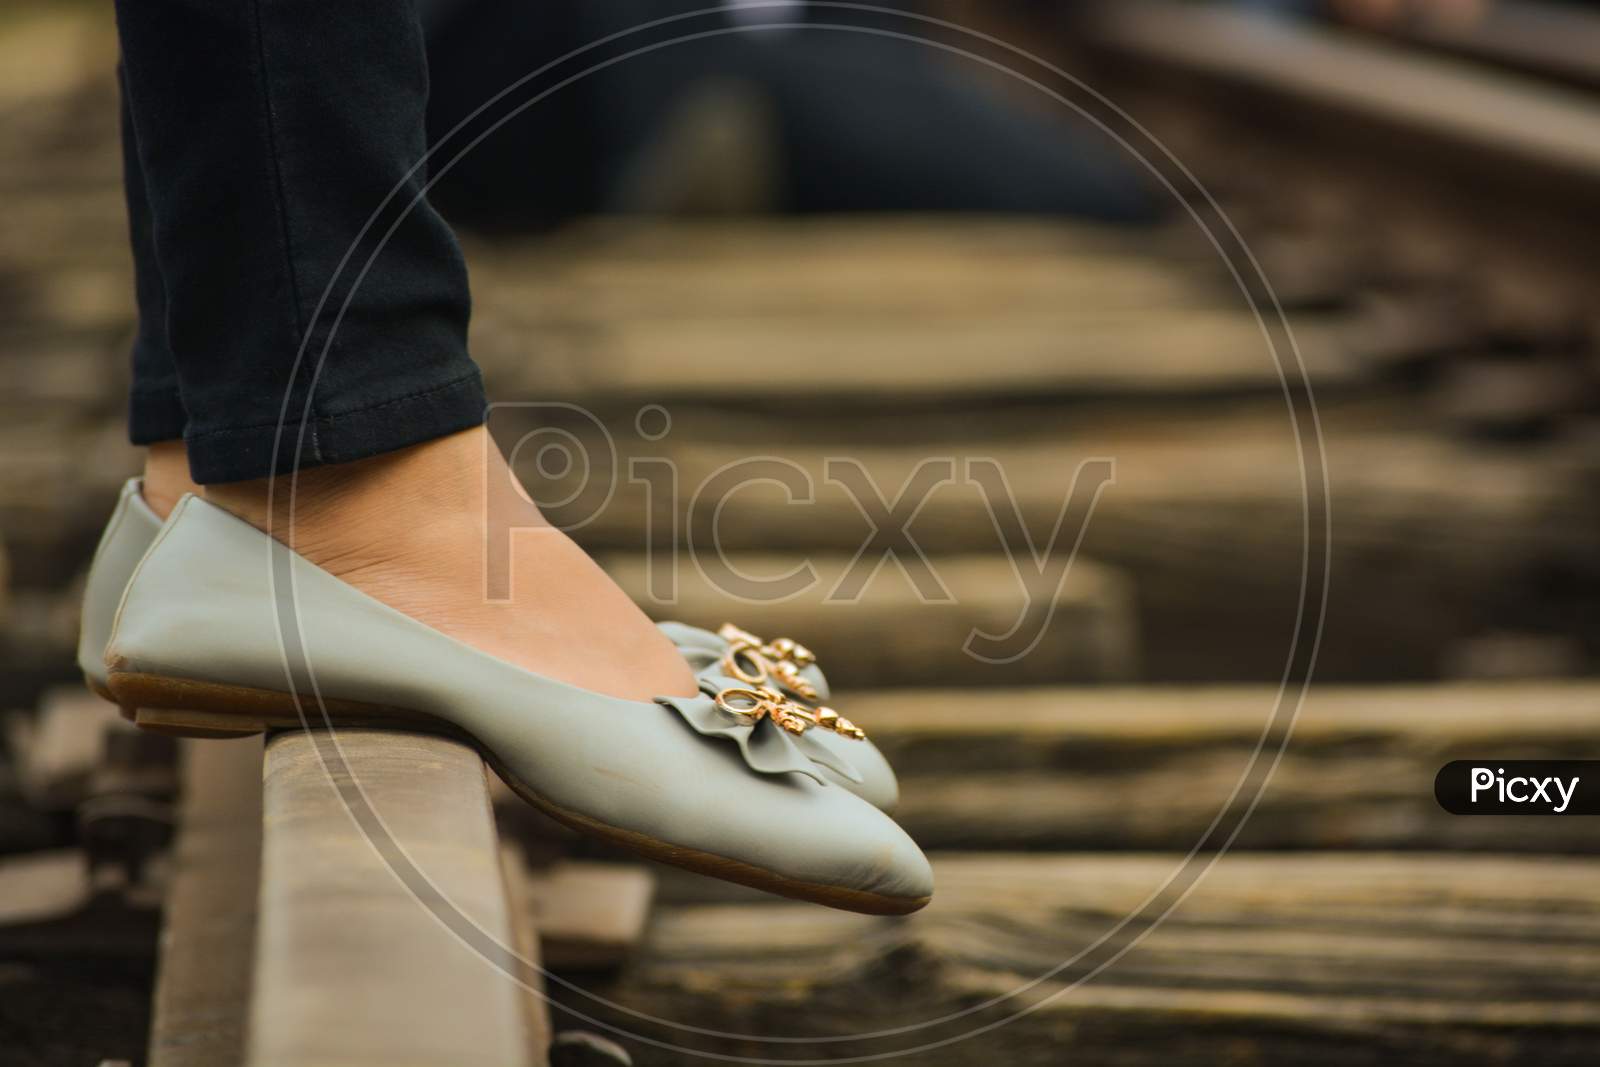 Foot (Feets) Of A Girls Standing On A Railway Track Wearing Grey Coloured Bellies With A Golden Flower On It. Old Fashioned Railway Tracks.